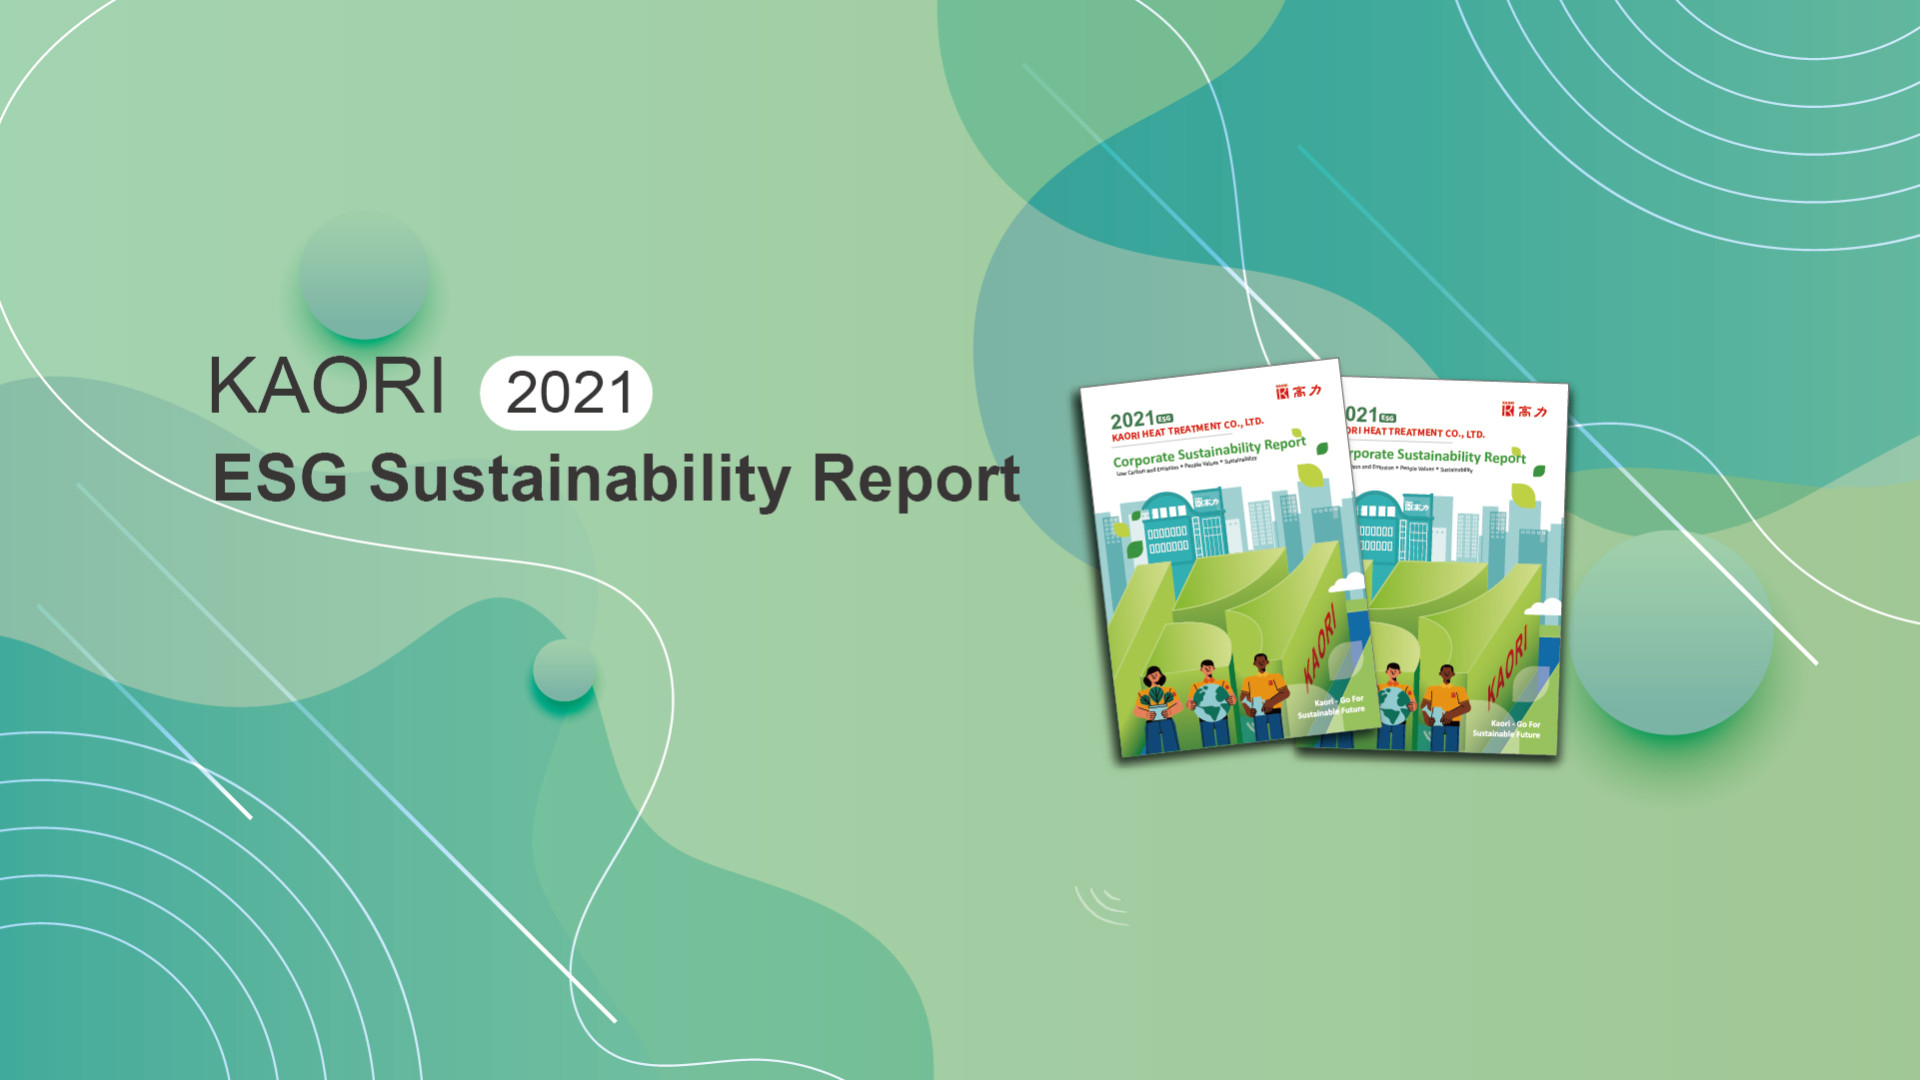  KAORI Releases Its First ESG Sustainability Report  